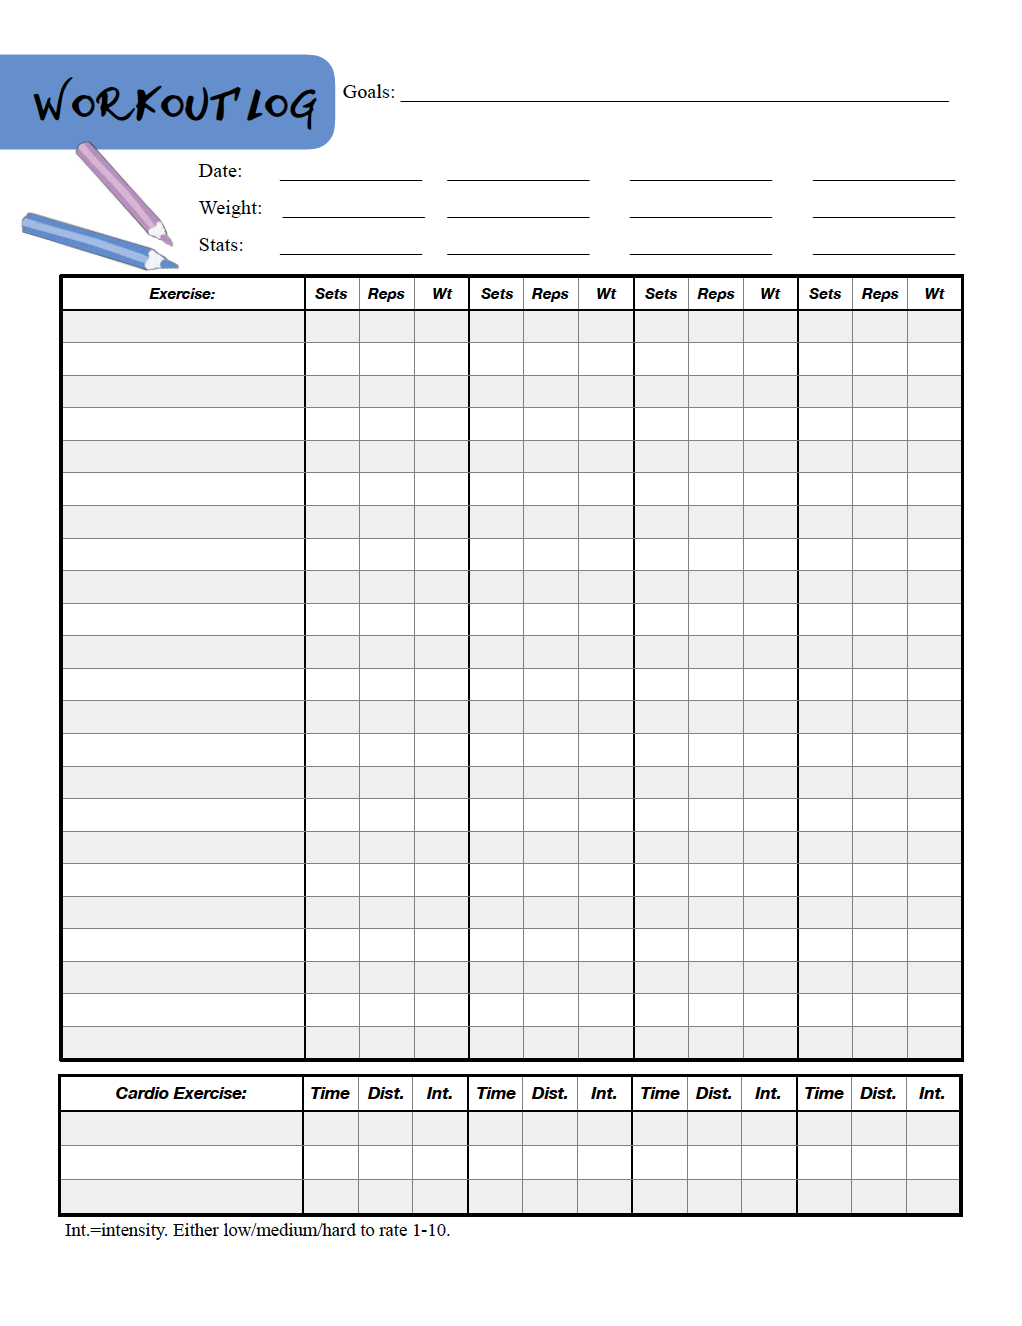 Free Printable Workout Logs: 3 Designs | Fitness | Workout Log - Free Printable Fitness Log